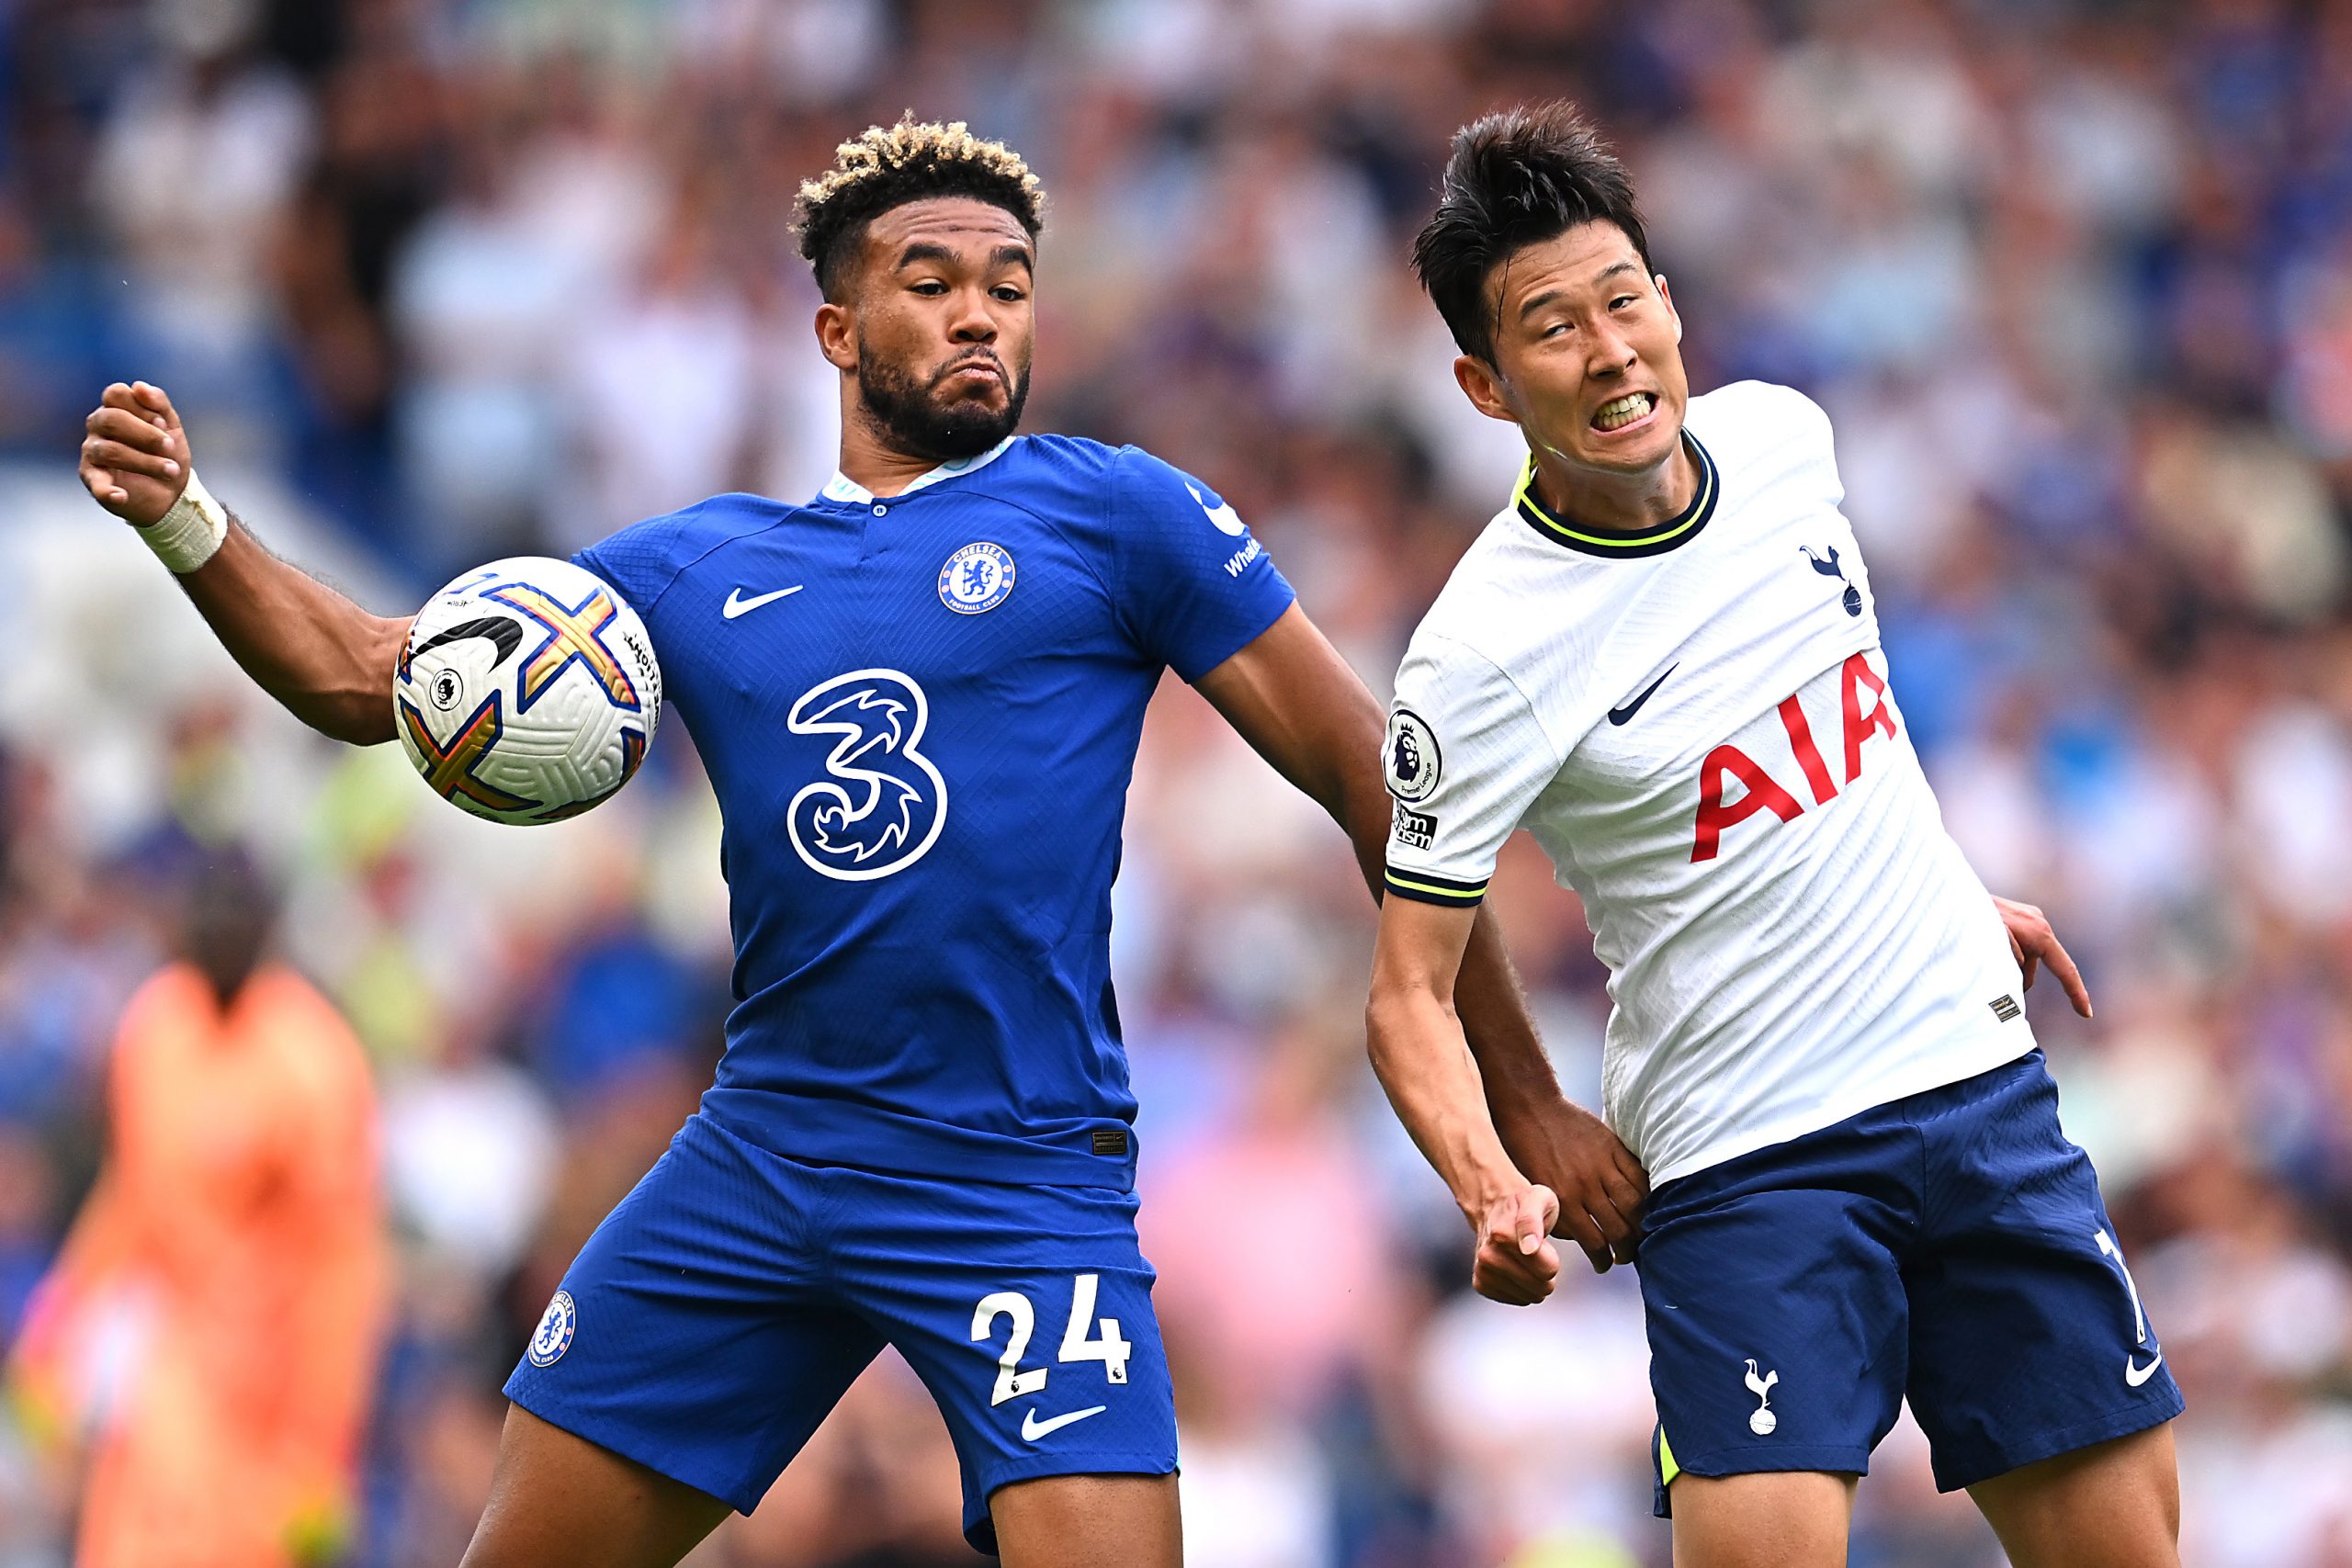 Reece James of Chelsea battles for possession with Son Heung-Min of Tottenham Hotspur.